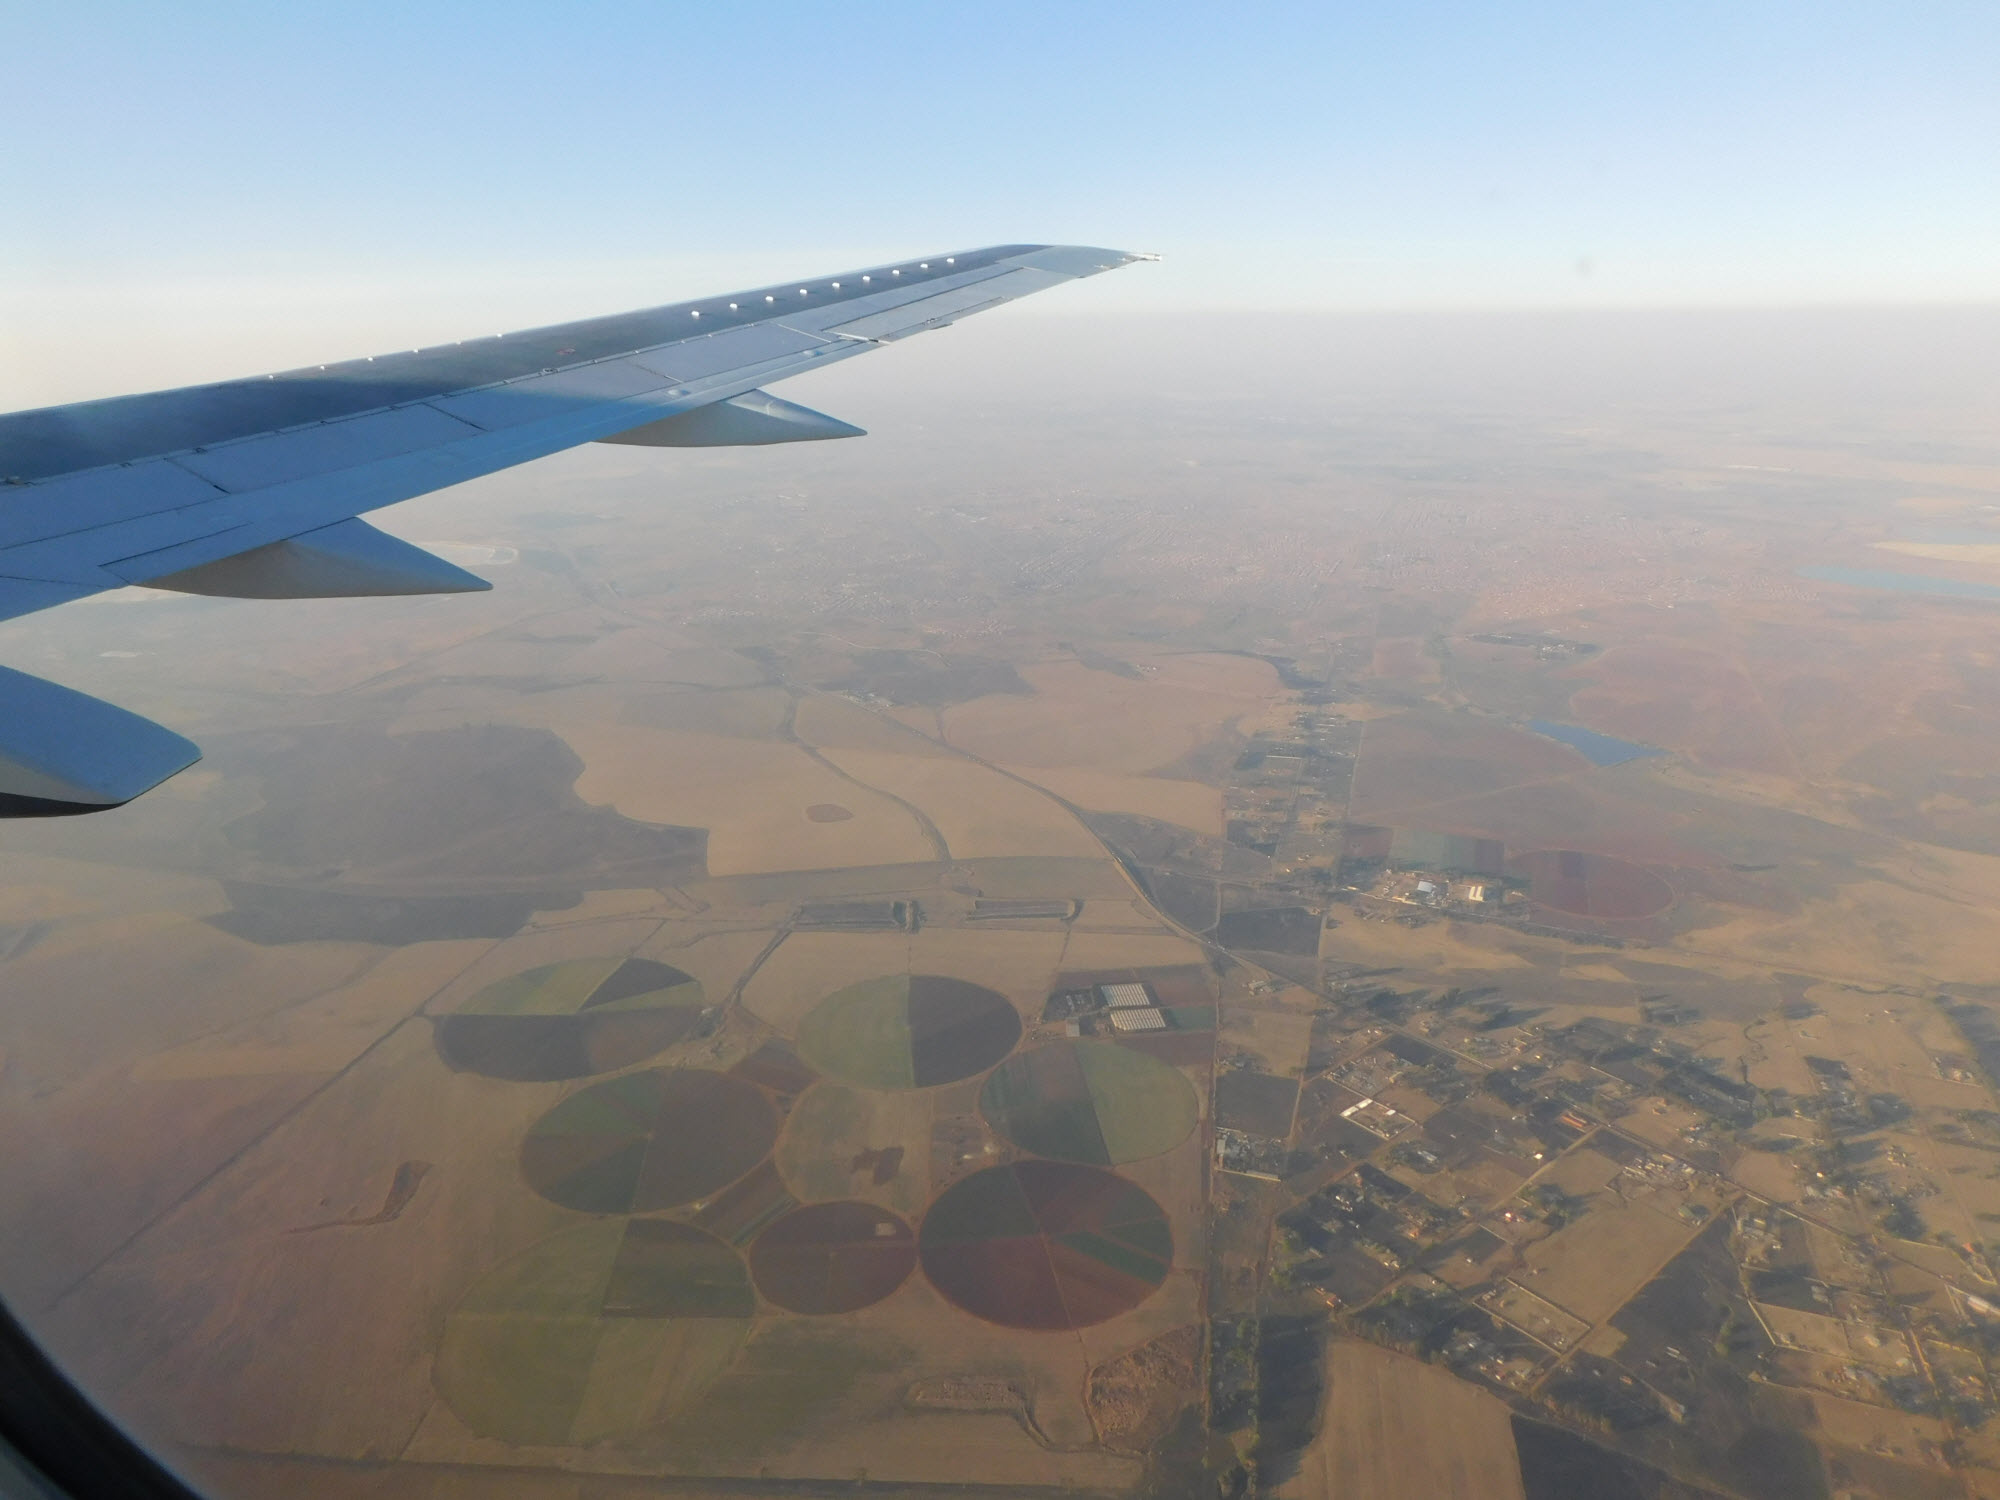 View from an airplane of Gauteng landscape ten minutes to touchdown at OR Tambo Airport, Johannesburg